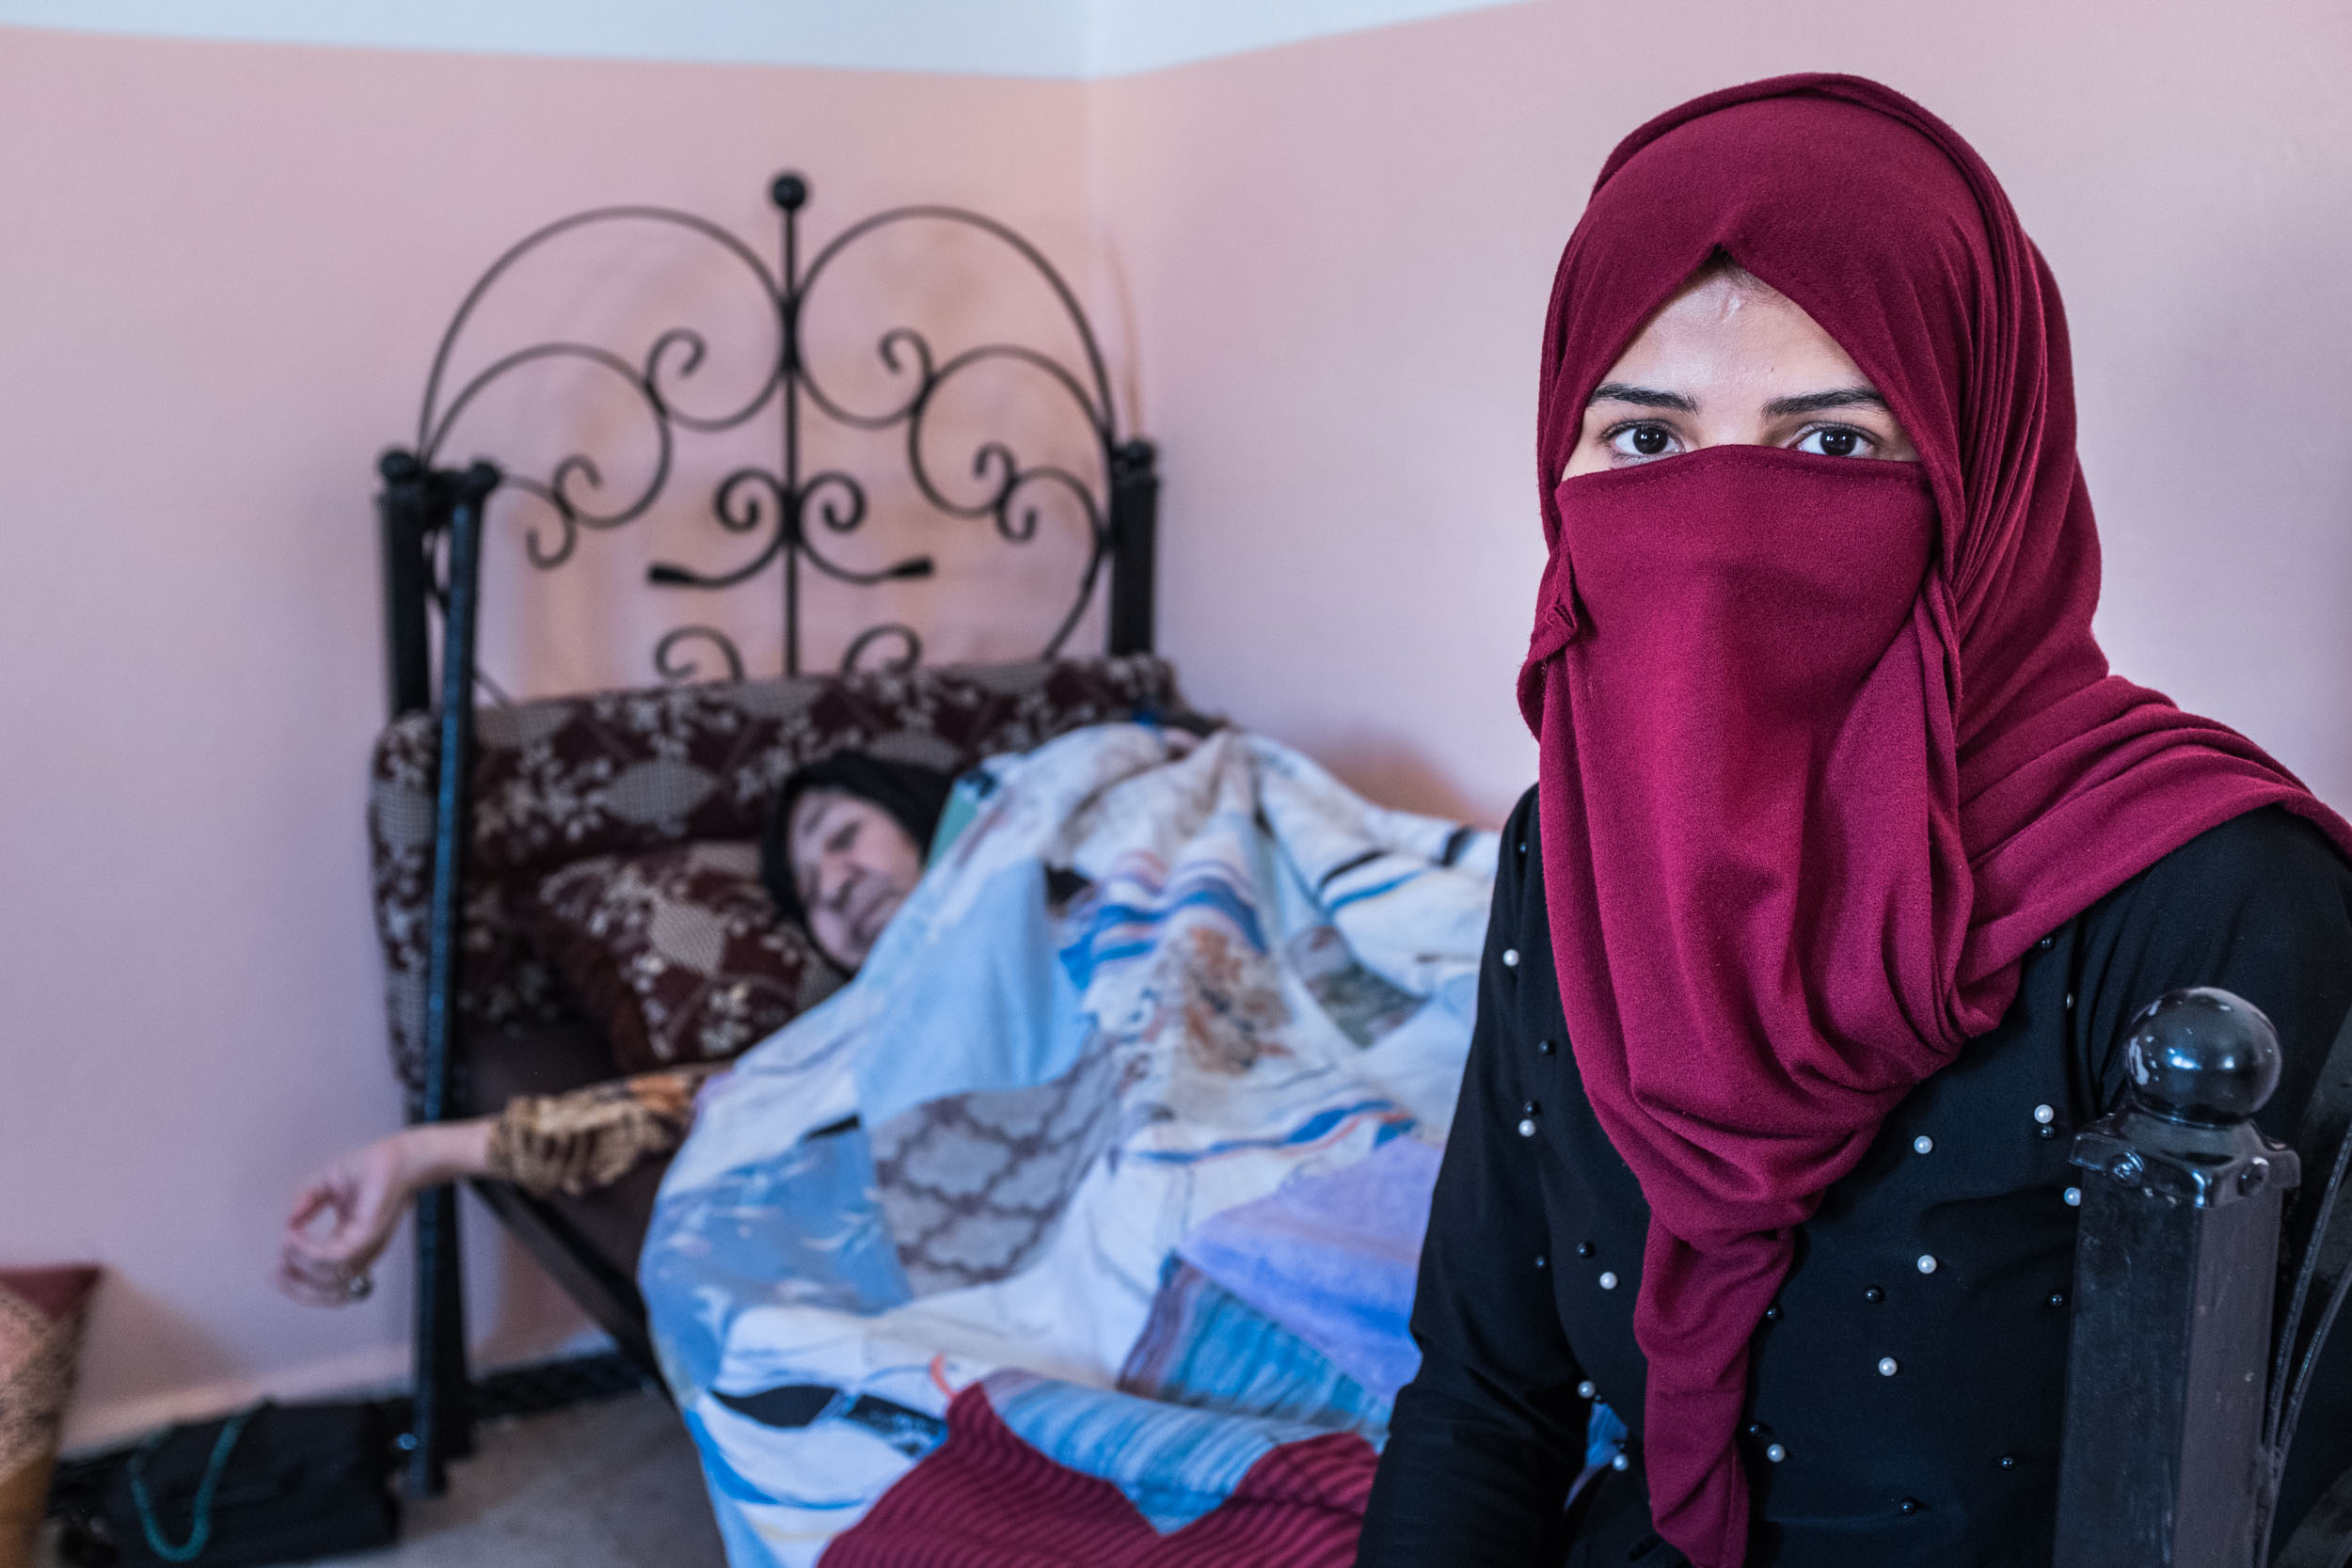 Nour - Married to a Syrian man at the age of 15. Photo by Martin Thaulow.